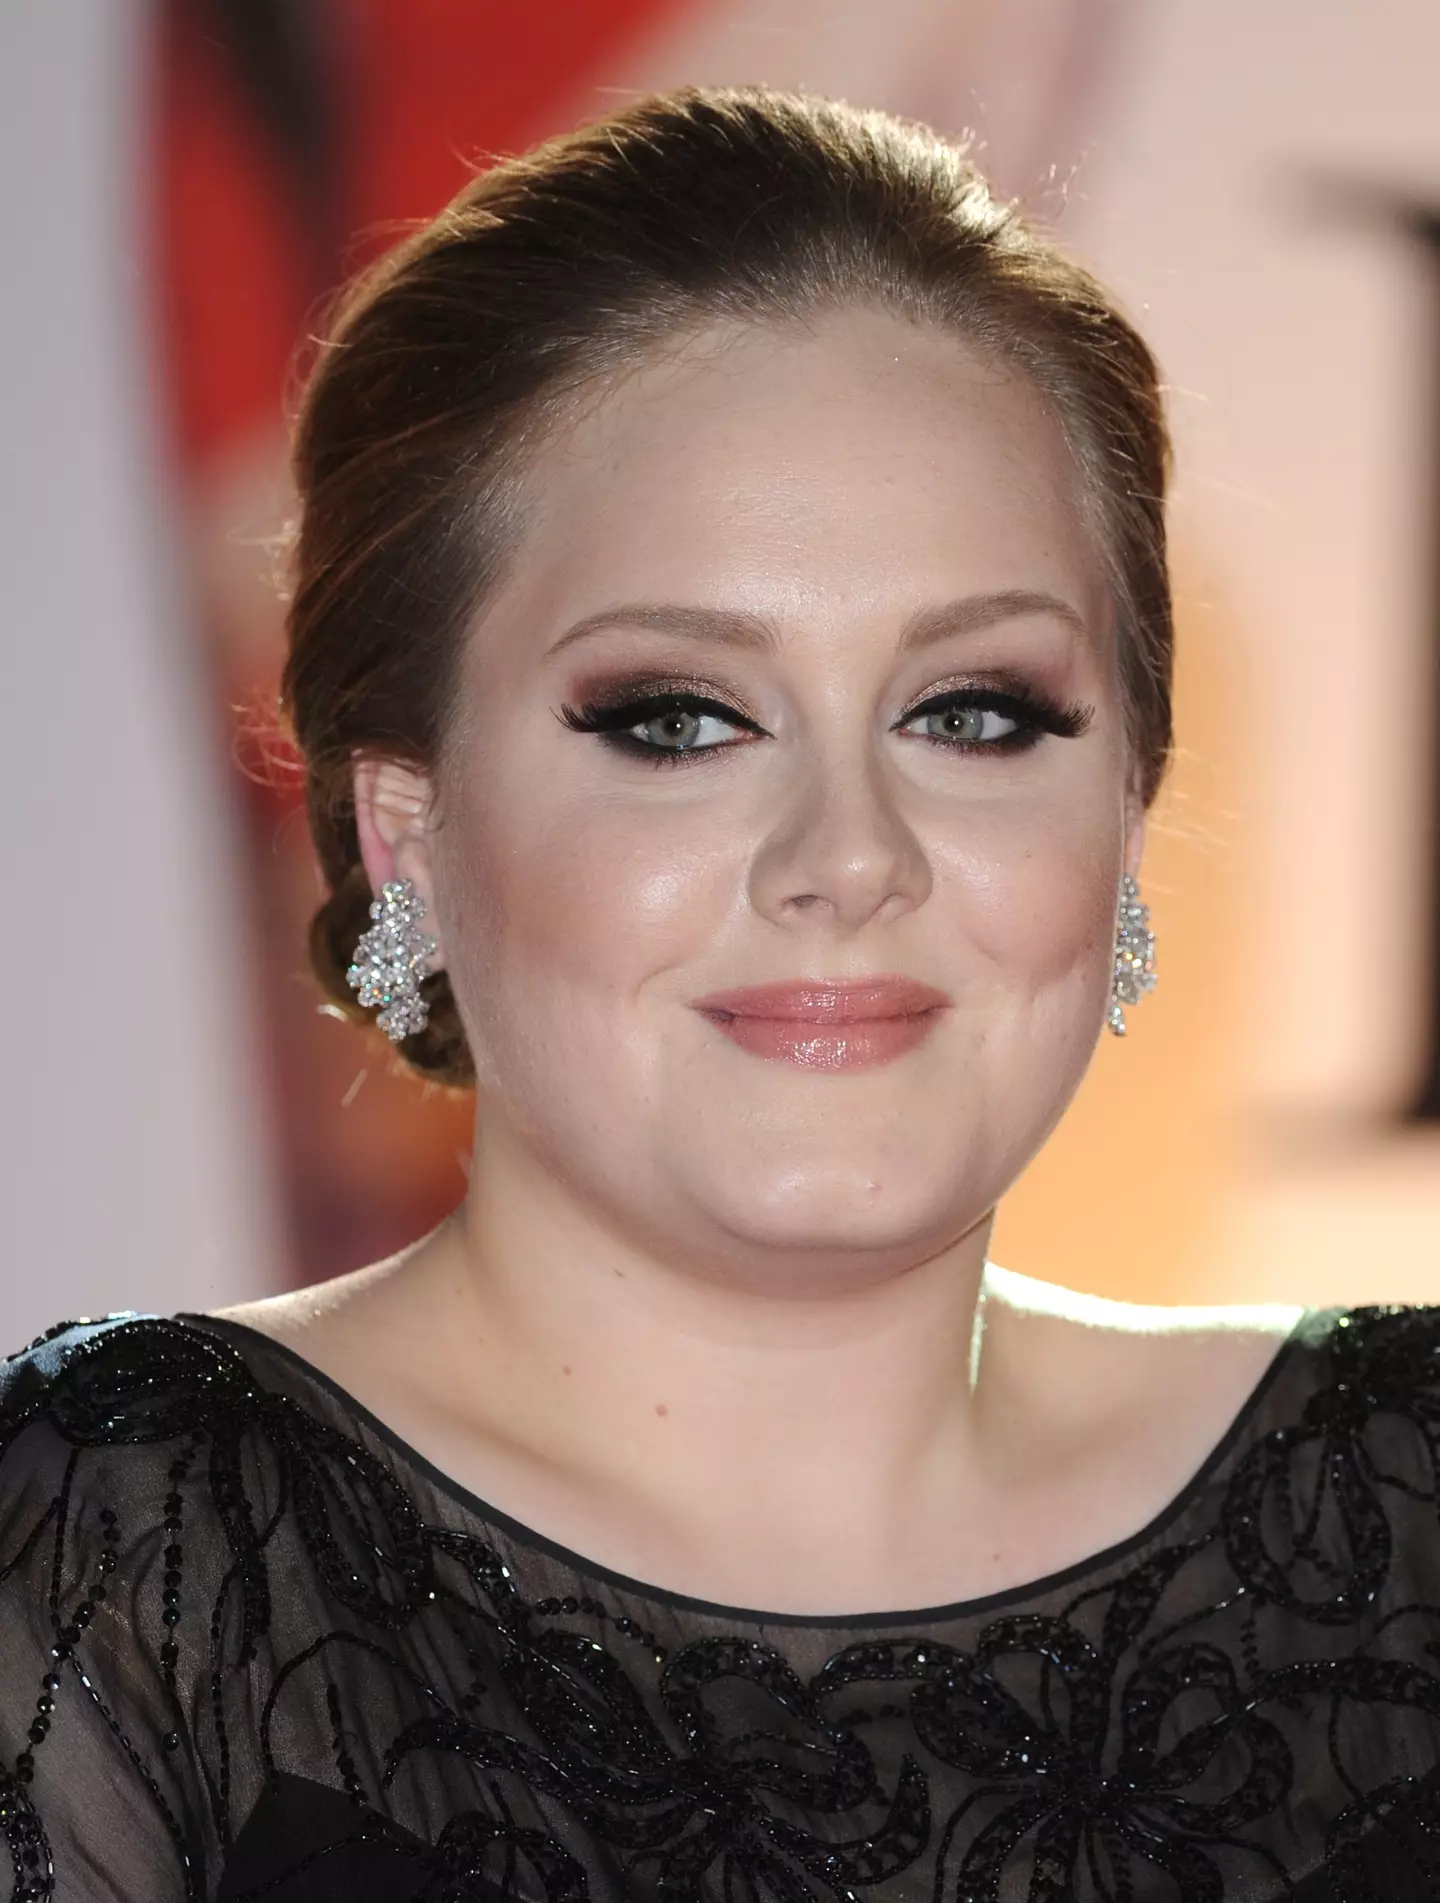 Adele was popular for being entirely, unapologetically herself (